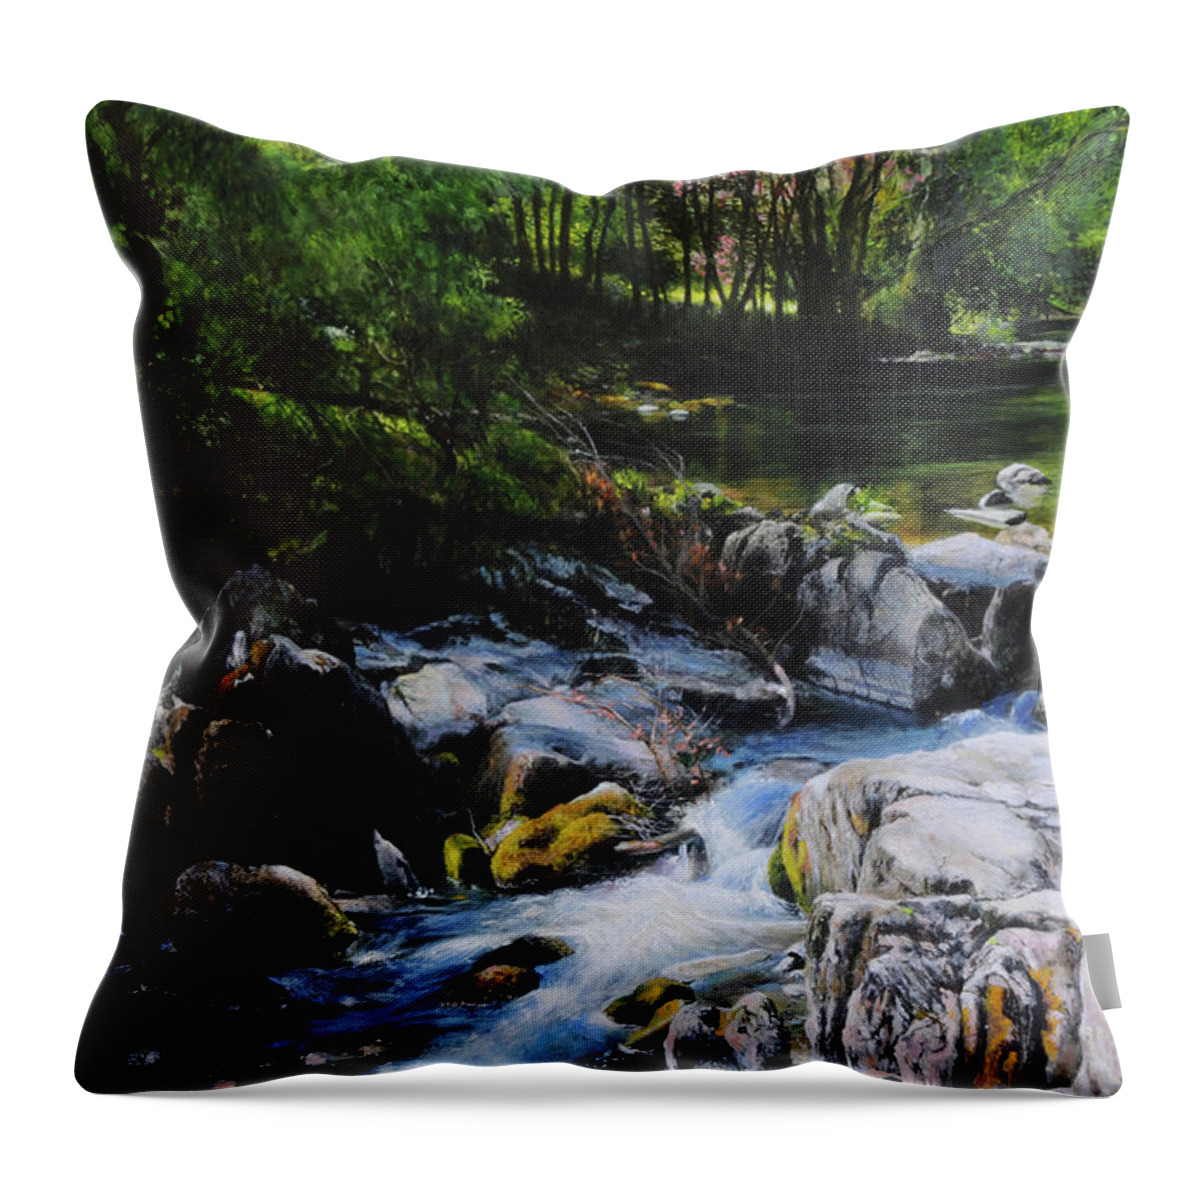 Landscape Throw Pillow featuring the painting River in Wales by Harry Robertson